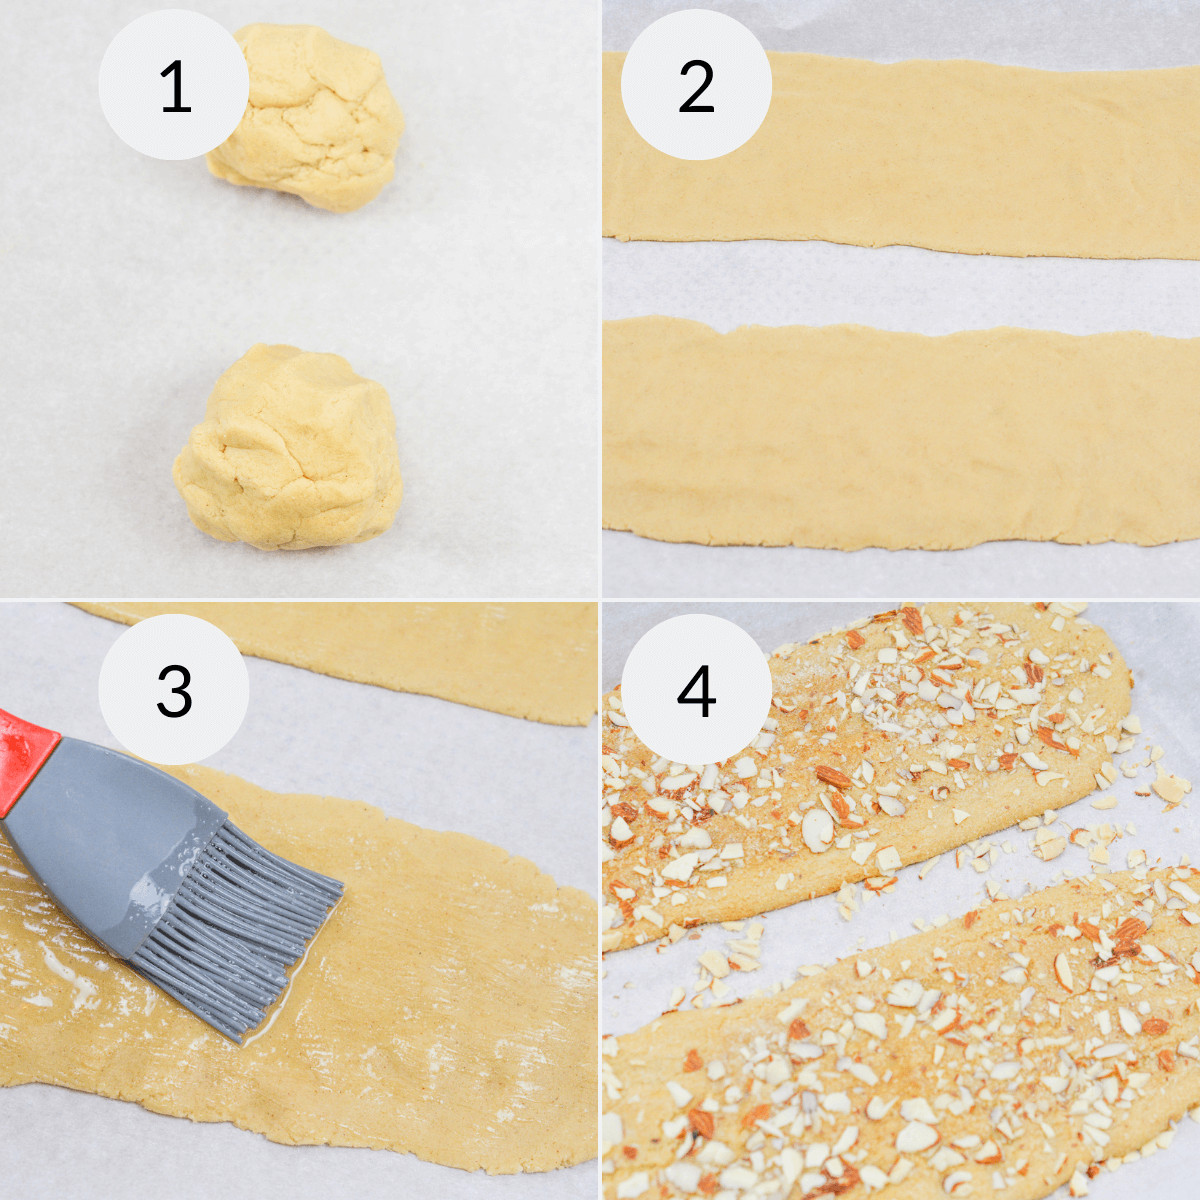 Shaping and baking the cookies.